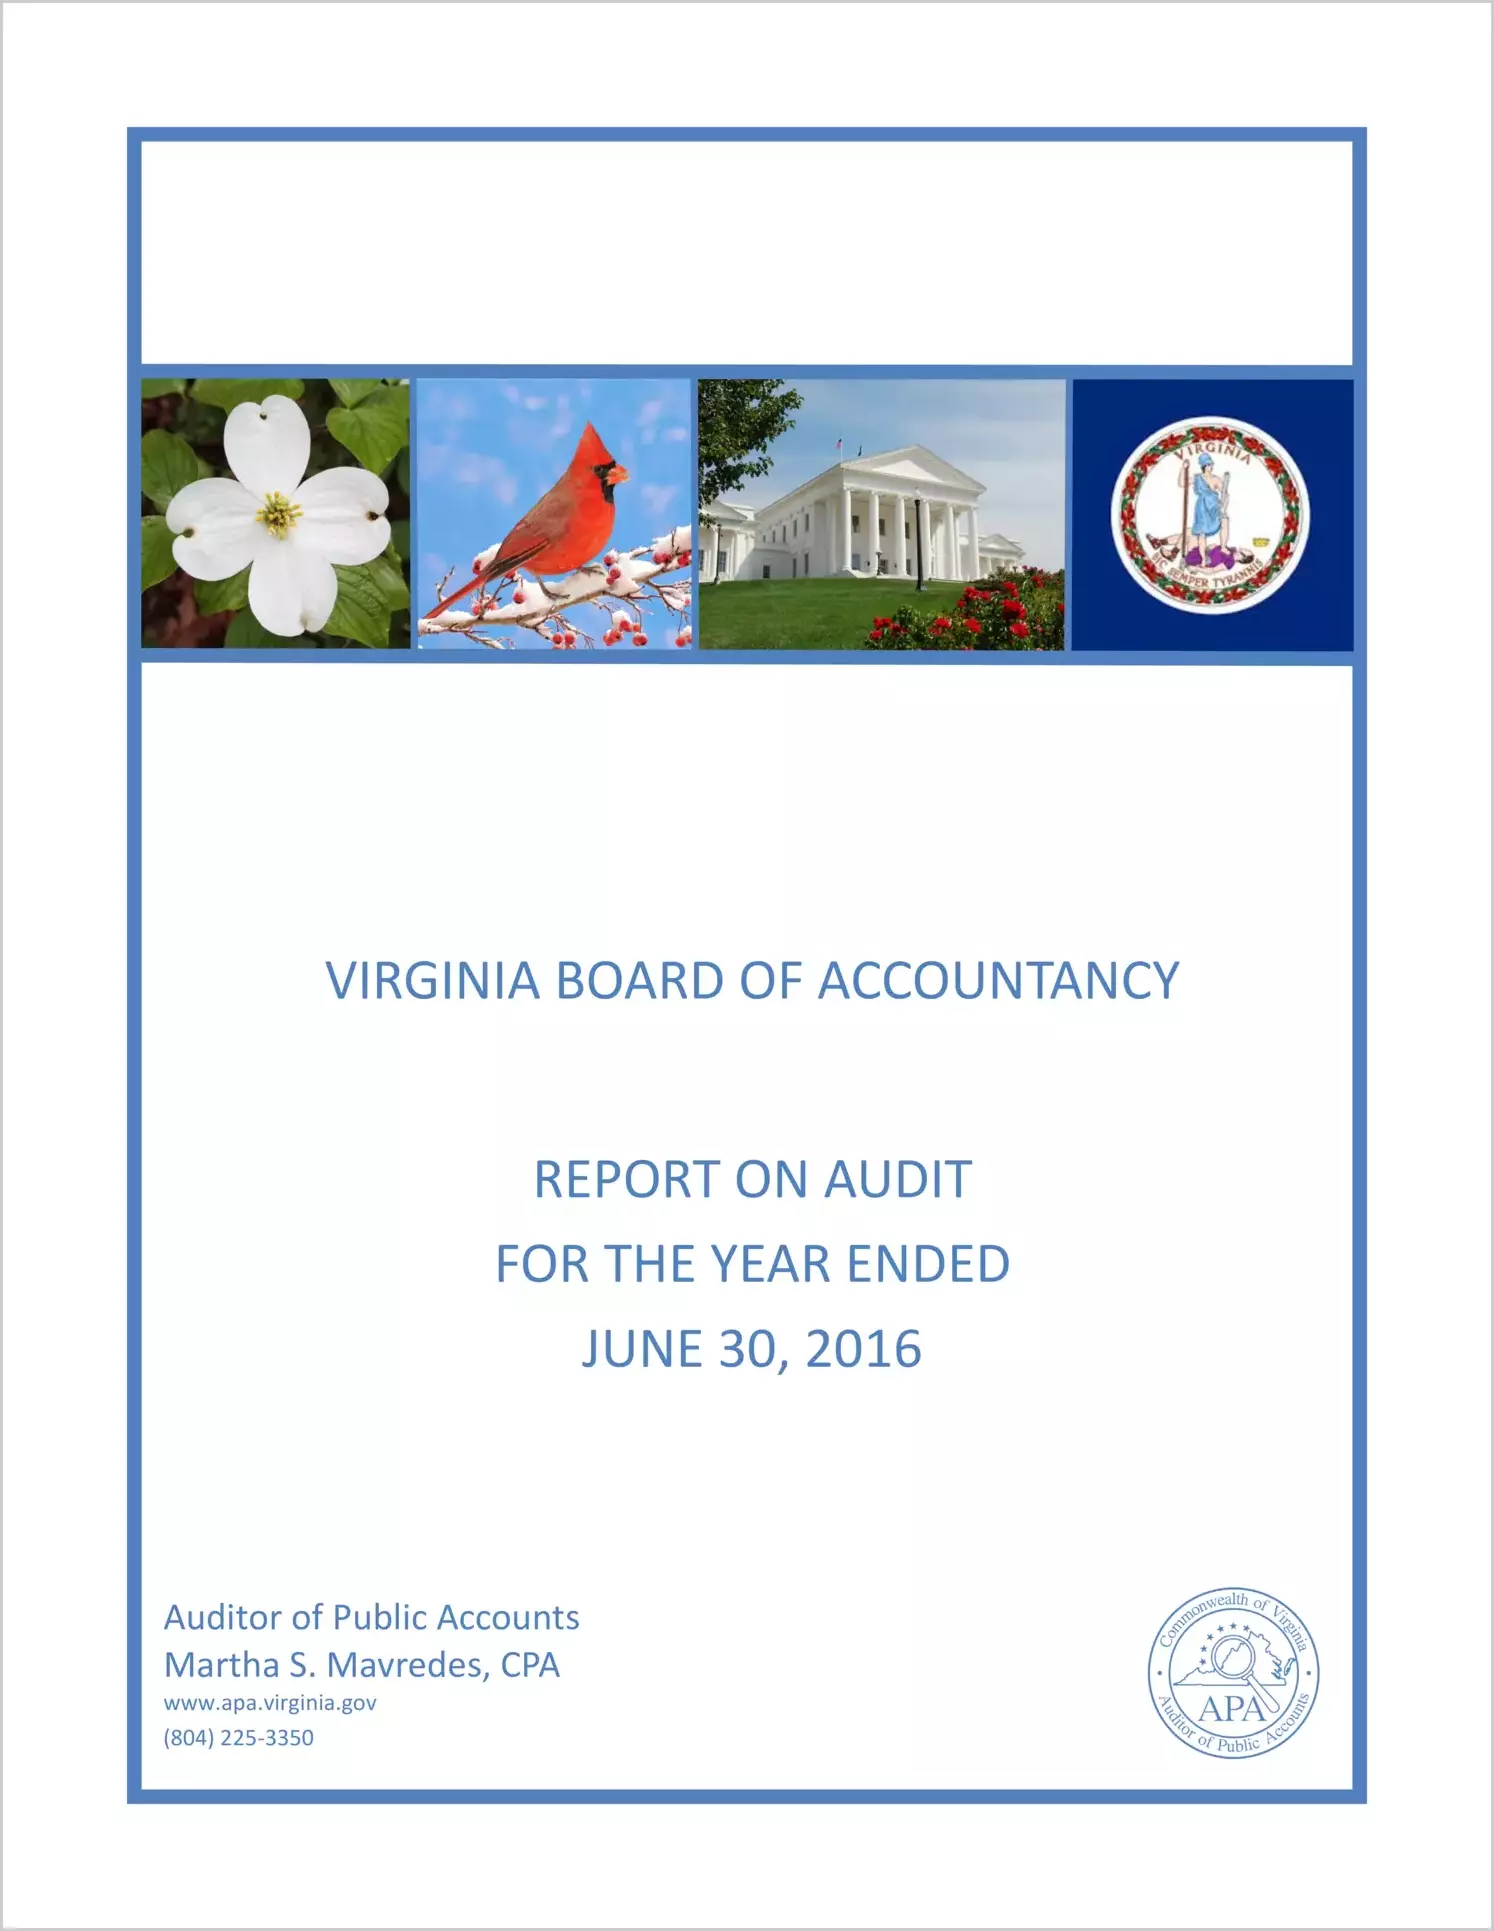 Virginia Board of Accountancy for the year ended June 30, 2016